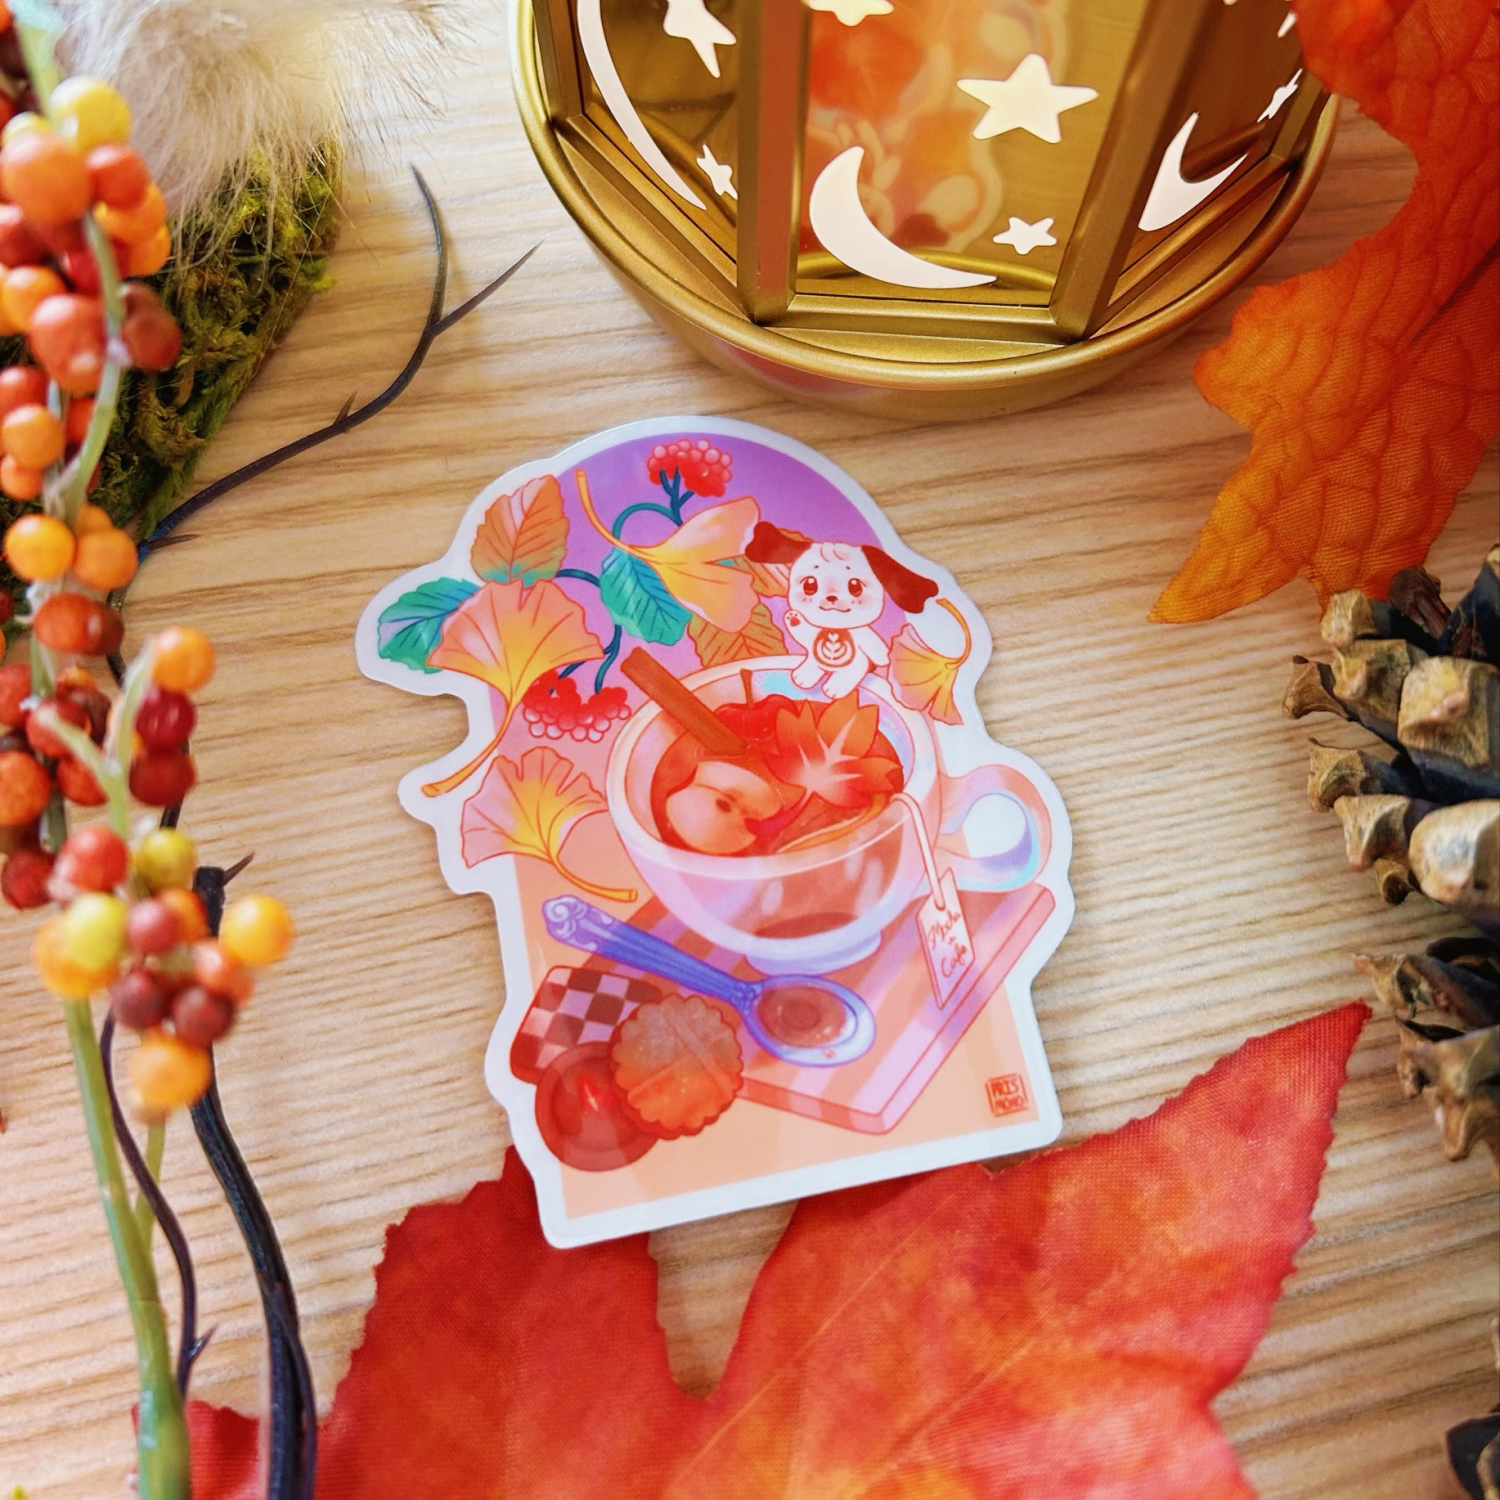 Adorable Mocha Cafe Autumn Fall Transparent Sticker with Puppy Dog Character and Desserts